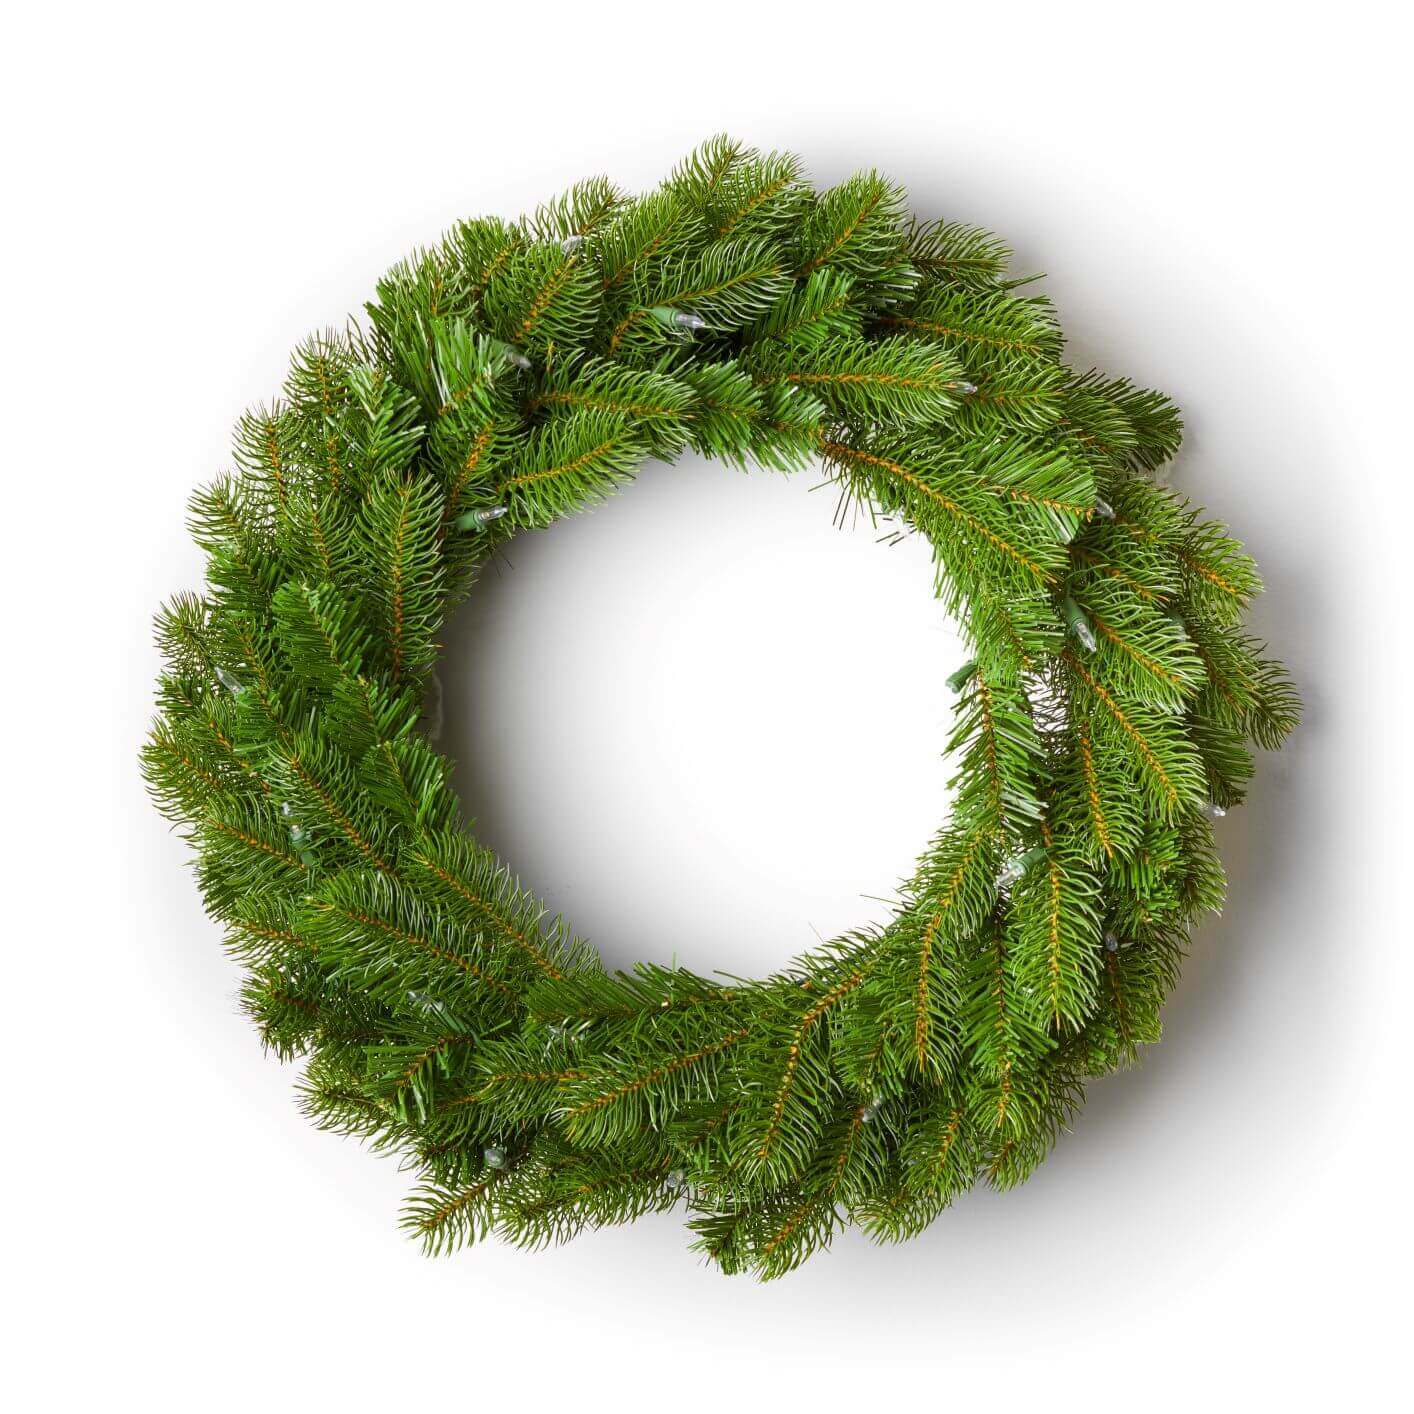 King of Christmas 24" King Douglas Fir Wreath with Warm White LED Lights (Battery Operated)